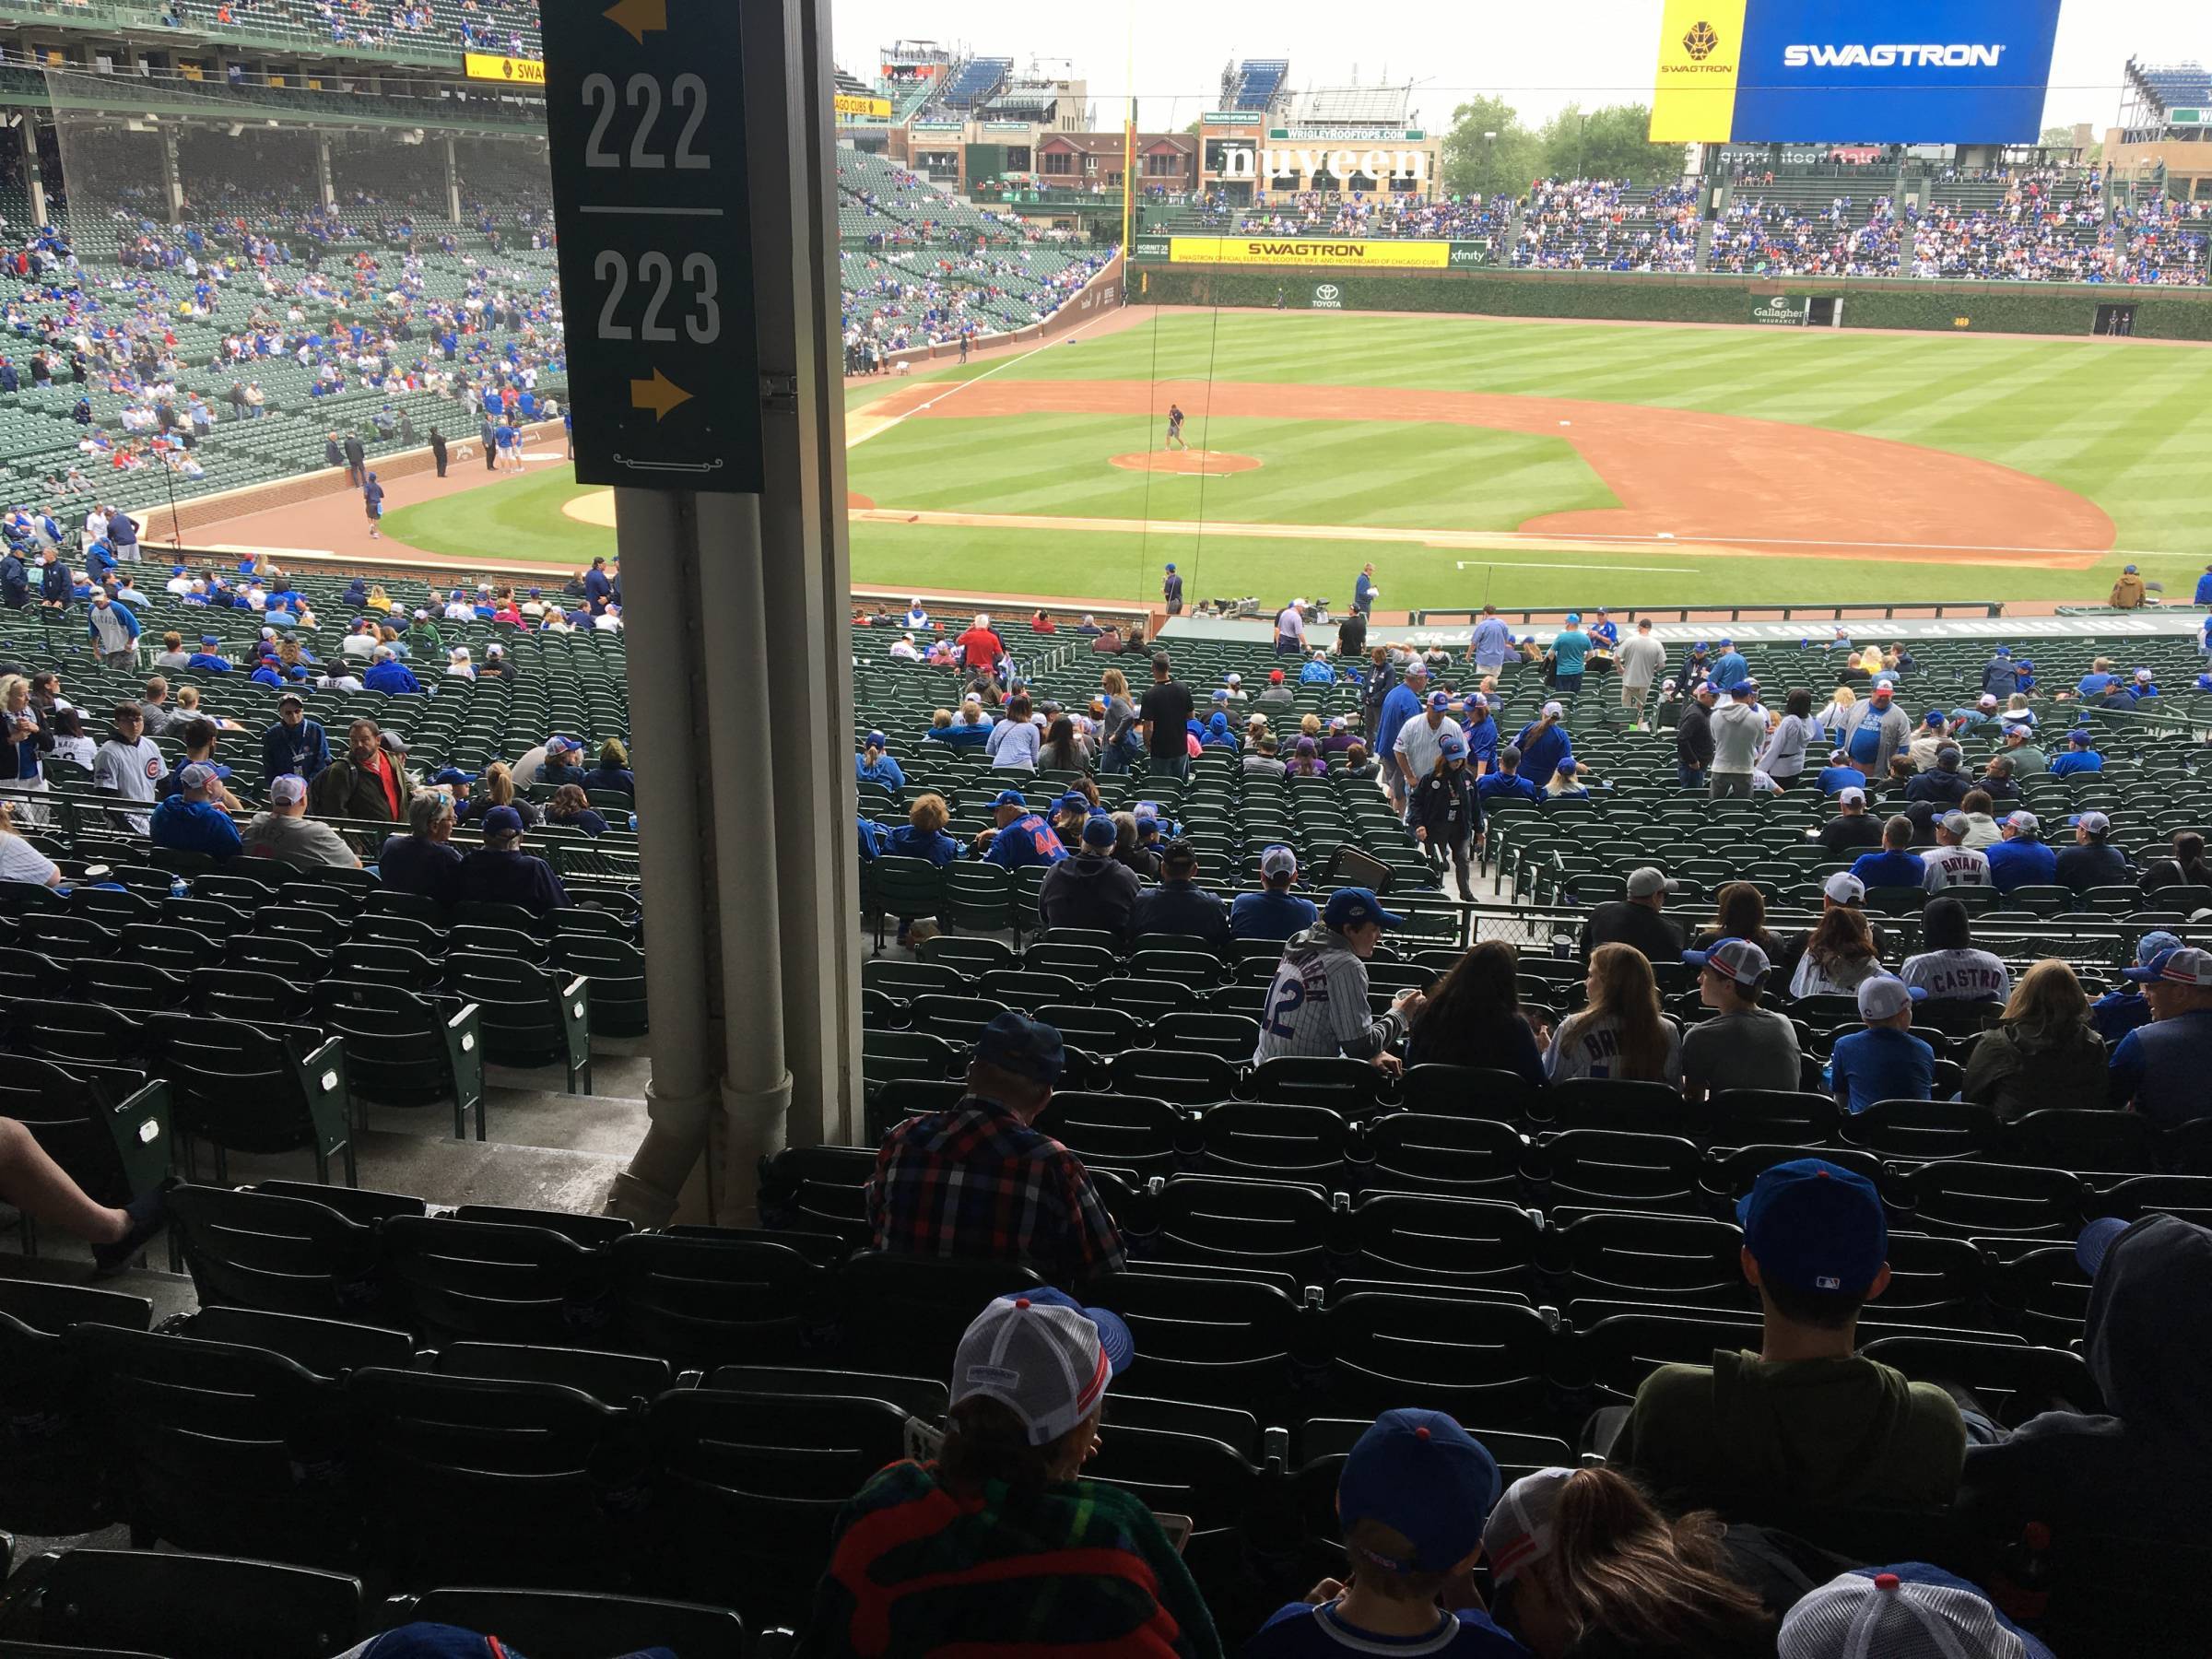 Pole in Section 223 at Wrigley Field